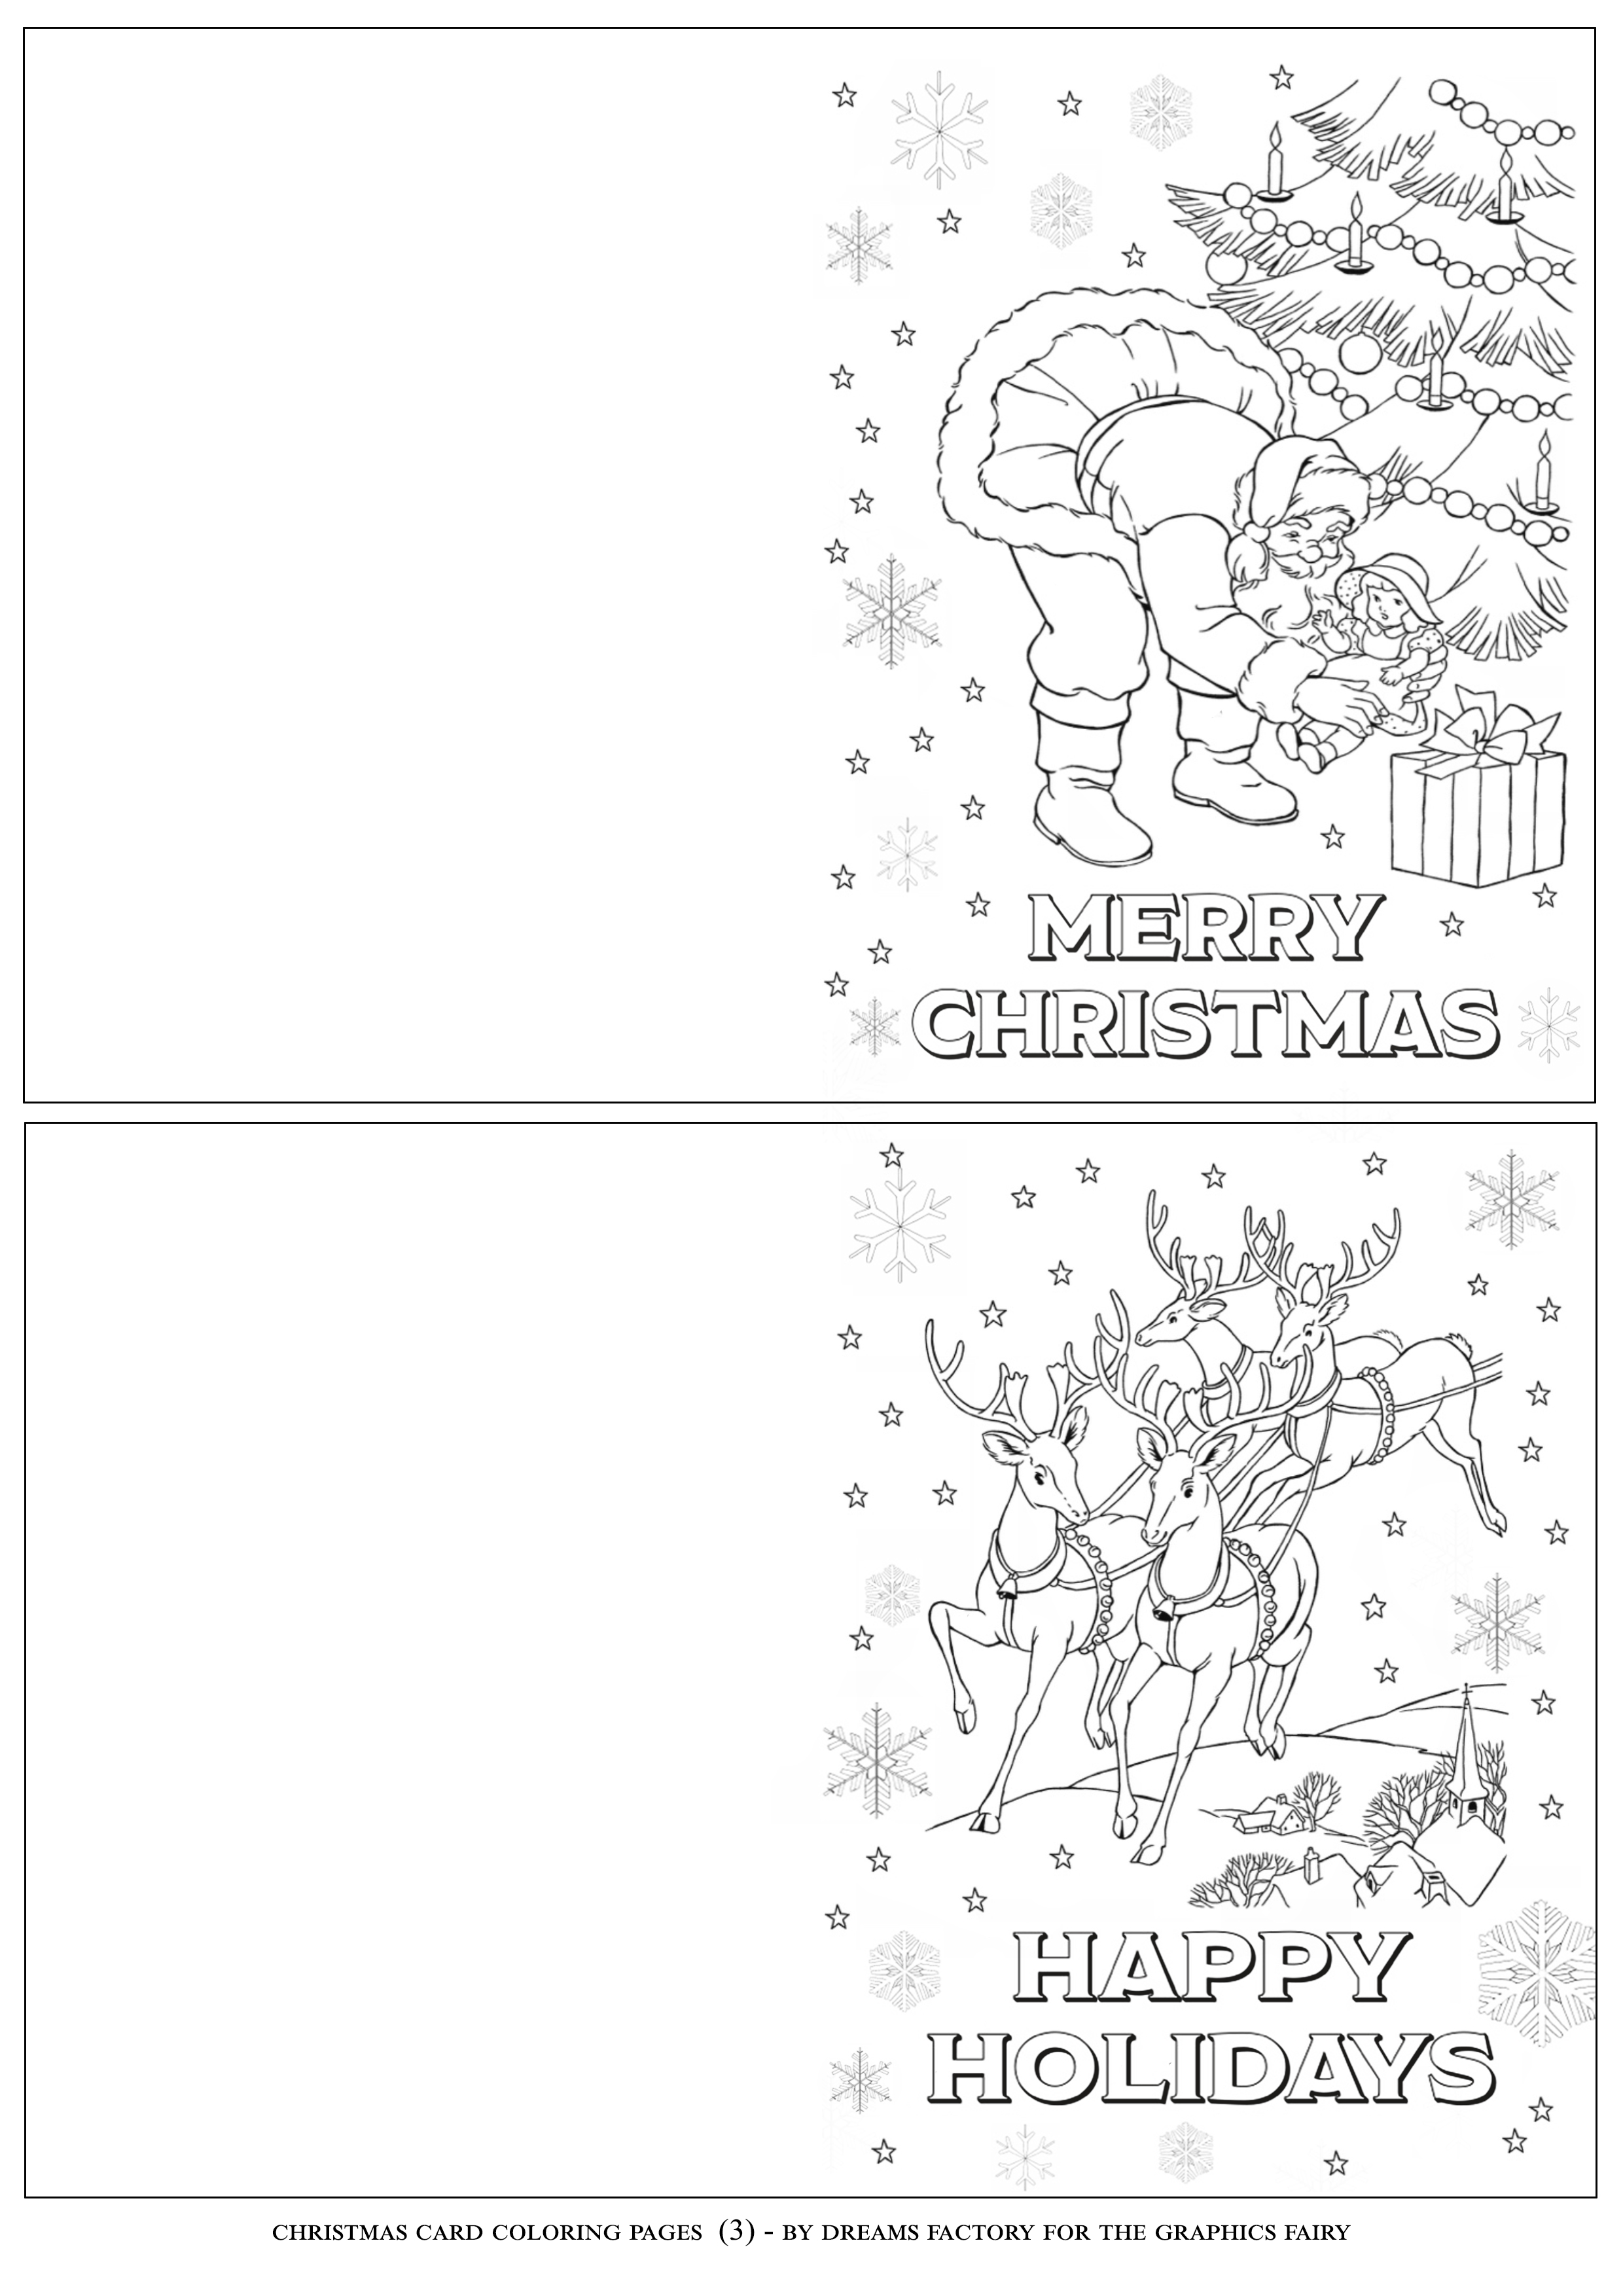 Christmas card coloring pages 3